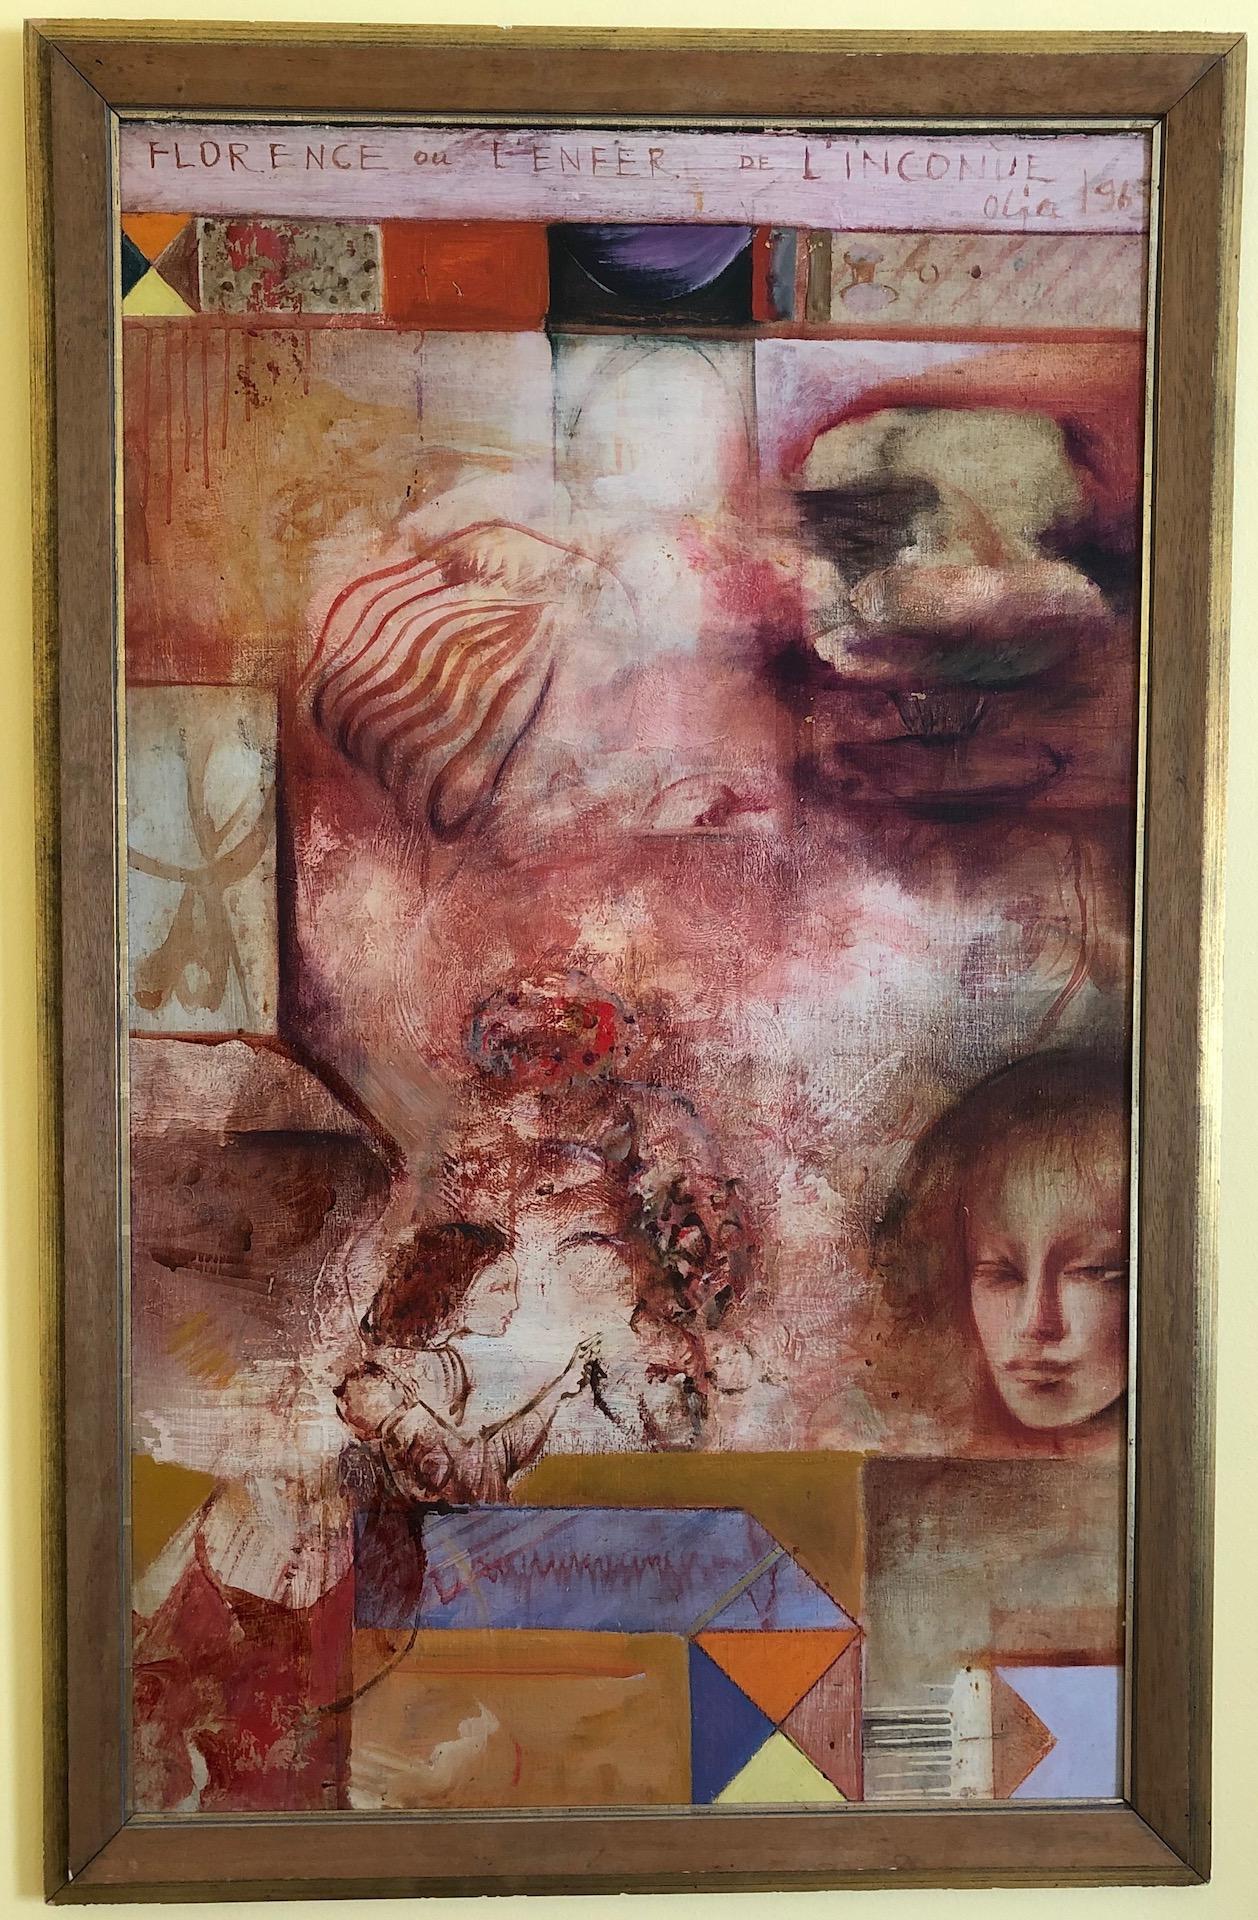 Unknown Abstract Painting - Olja Ivanjicki "Florence or Hell of l'Inconnue De La Seine" Oil Painting c.1965